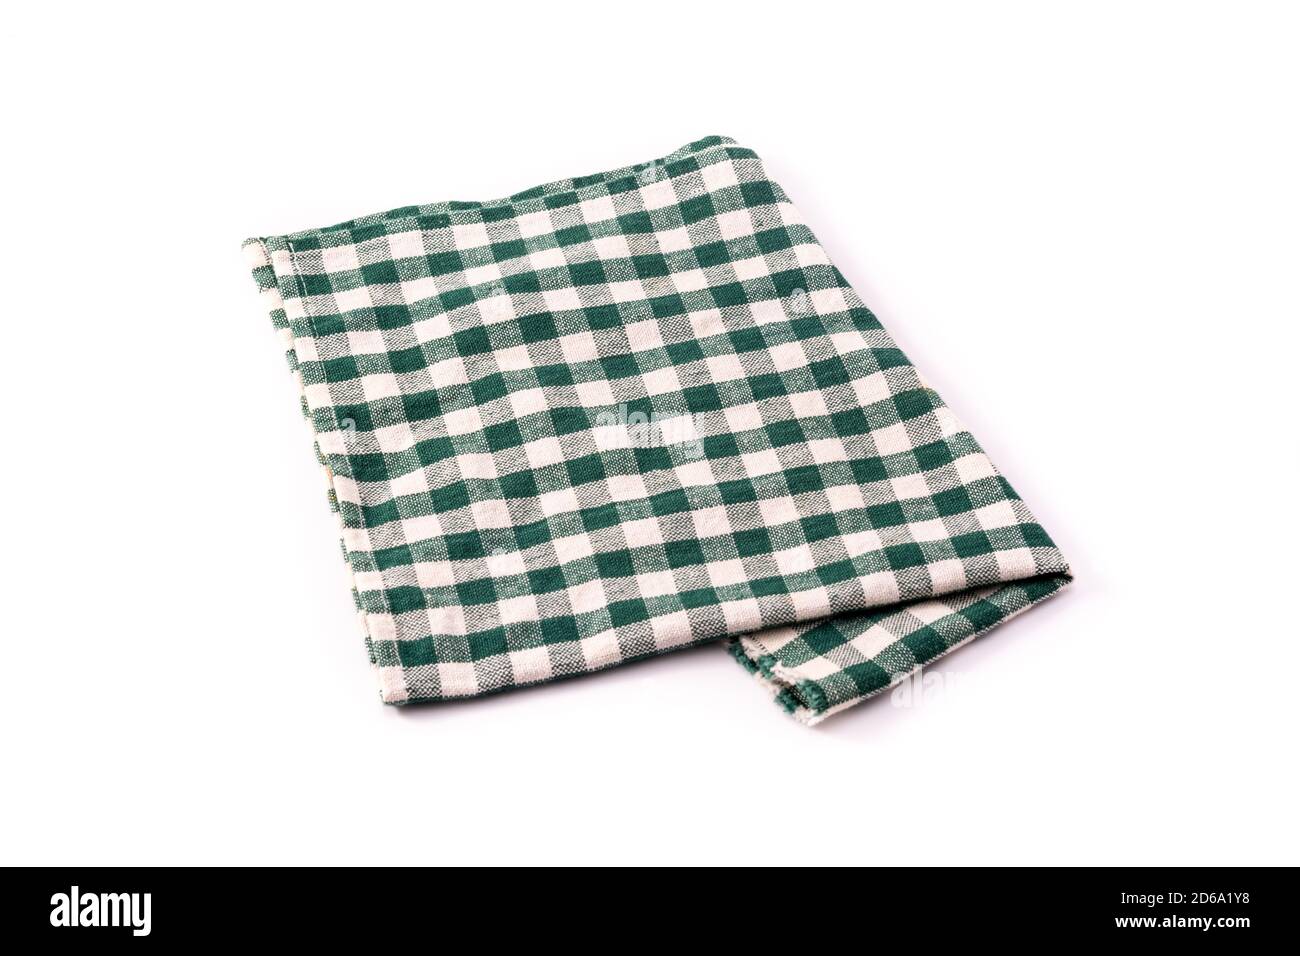 Green tablecloth isolated on white background Stock Photo